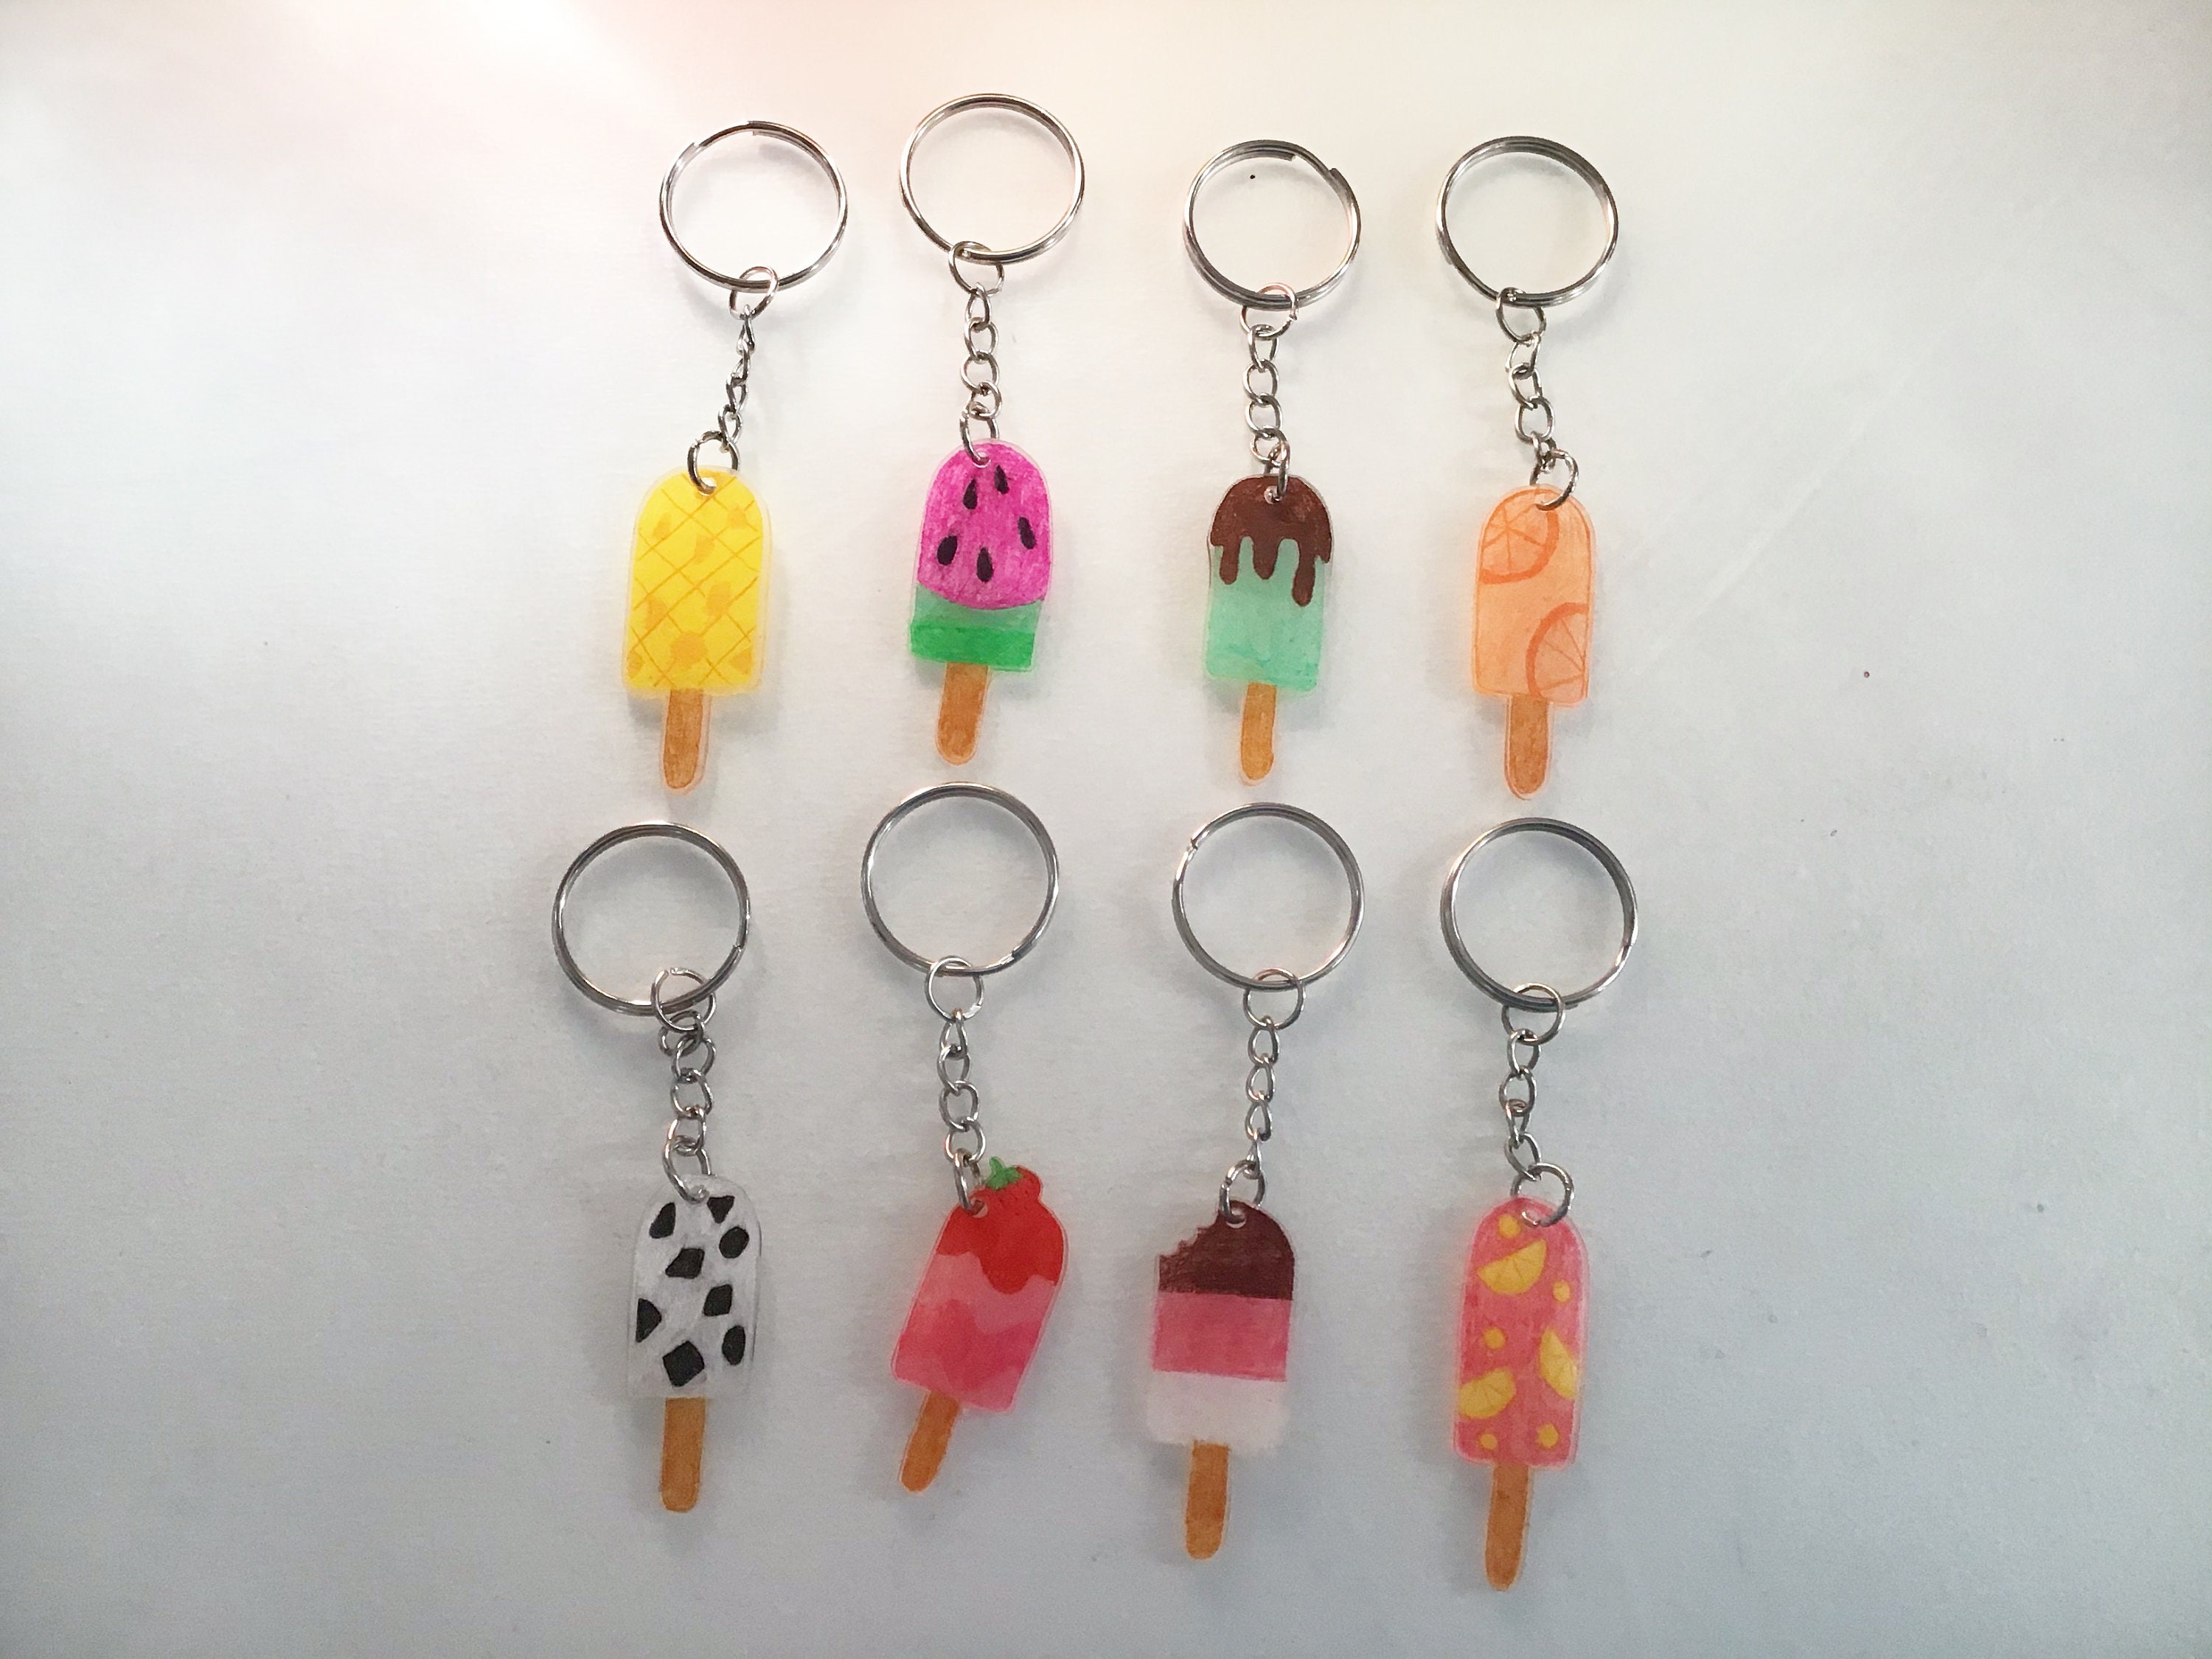 shrinky-dink-collectible-keychains-popsicles-etsy